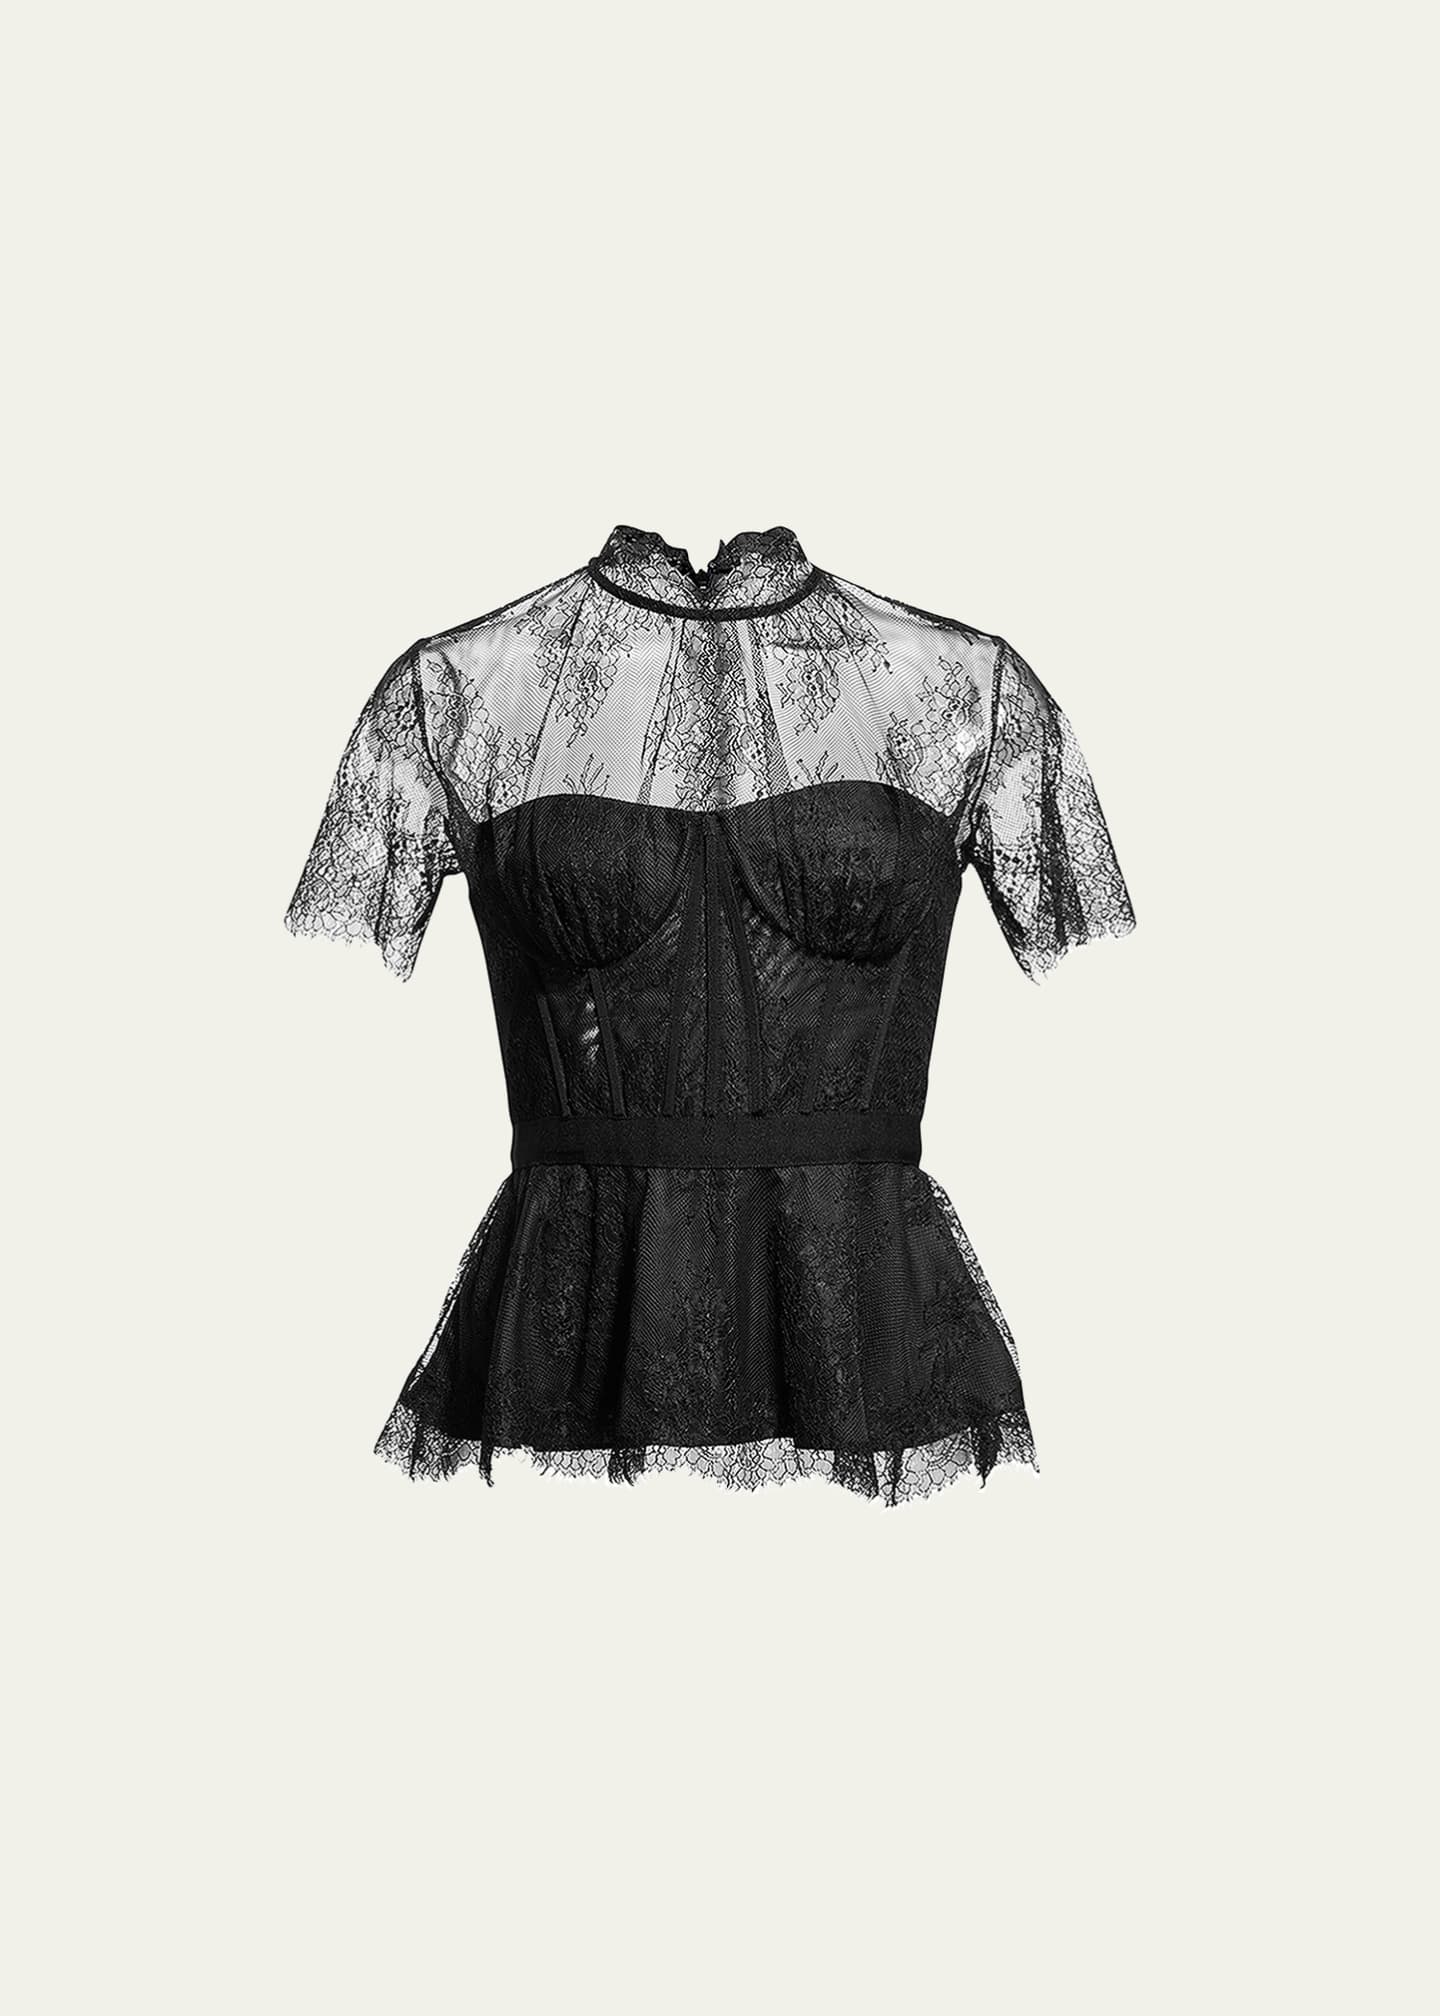 Shirley lace bustier crop top in black - Simkhai